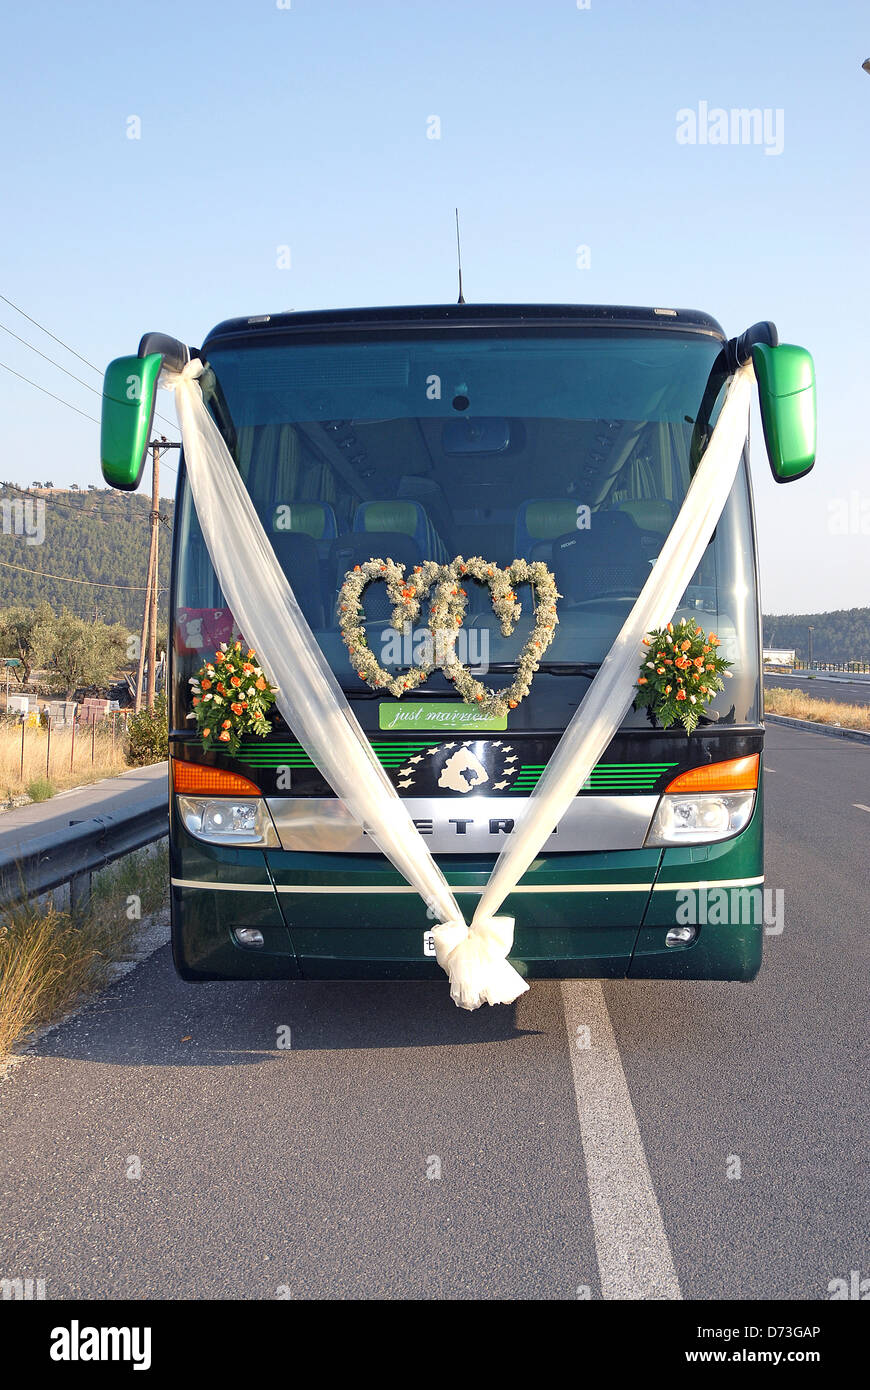 Bus decorated for the wedding of a Greek bus driver Stock Photo